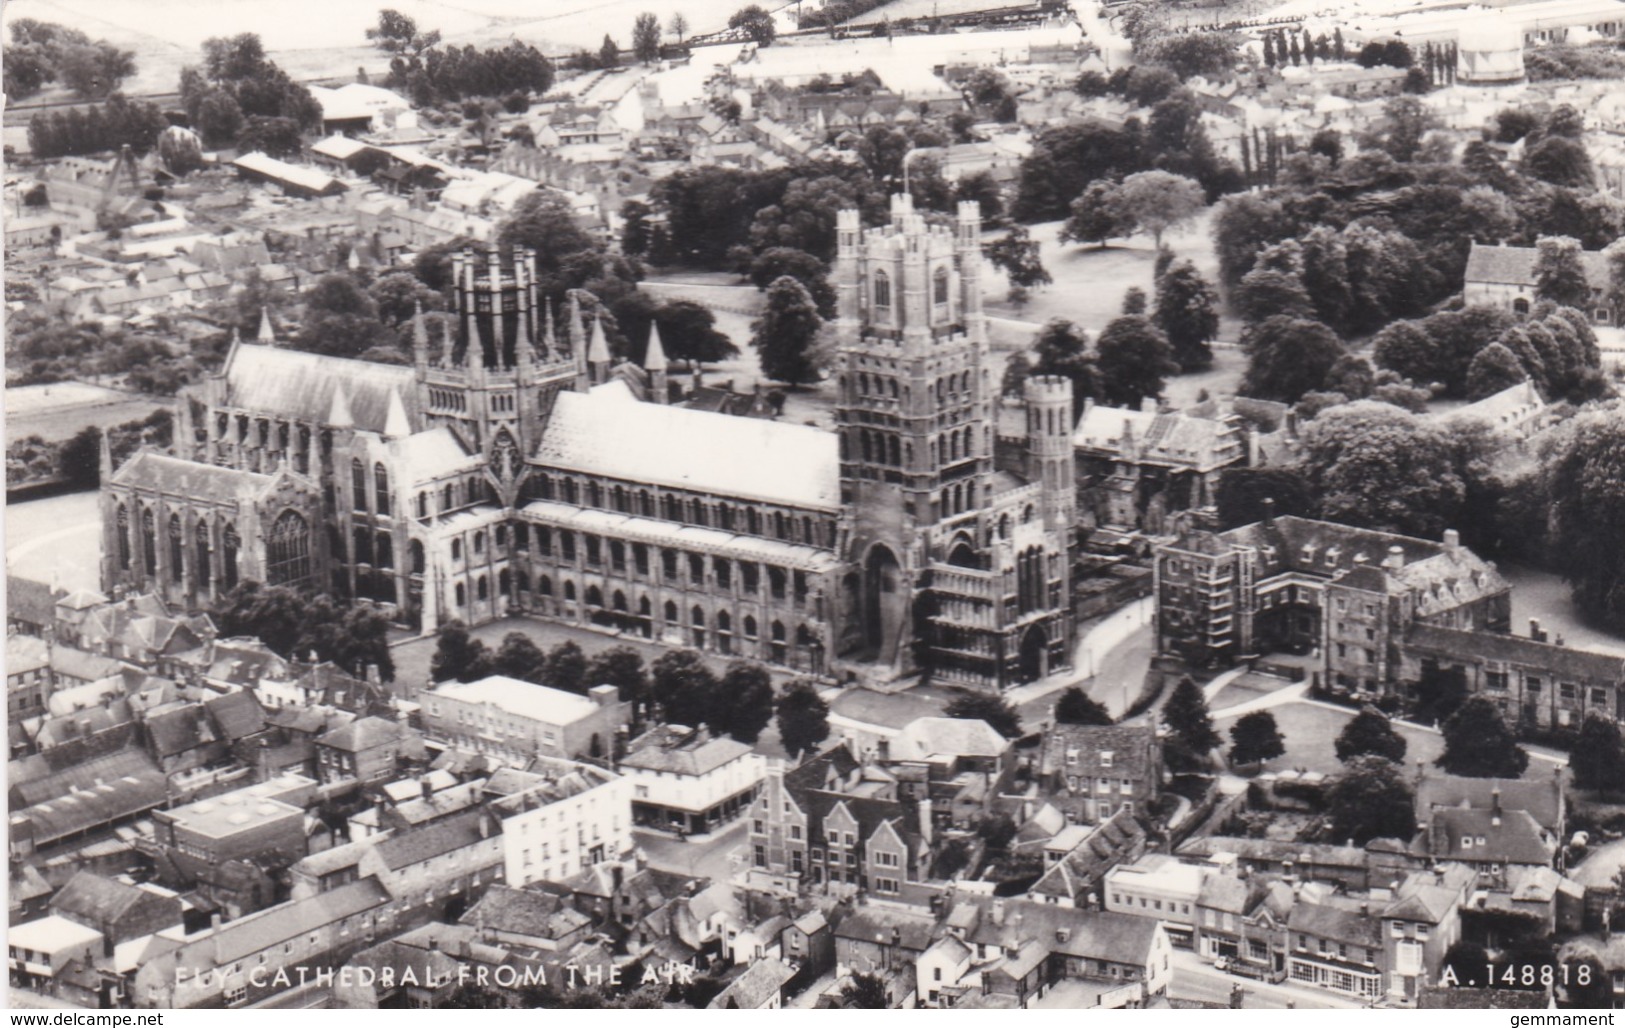 ELY CATHEDRAL FROM THE AIR - Ely